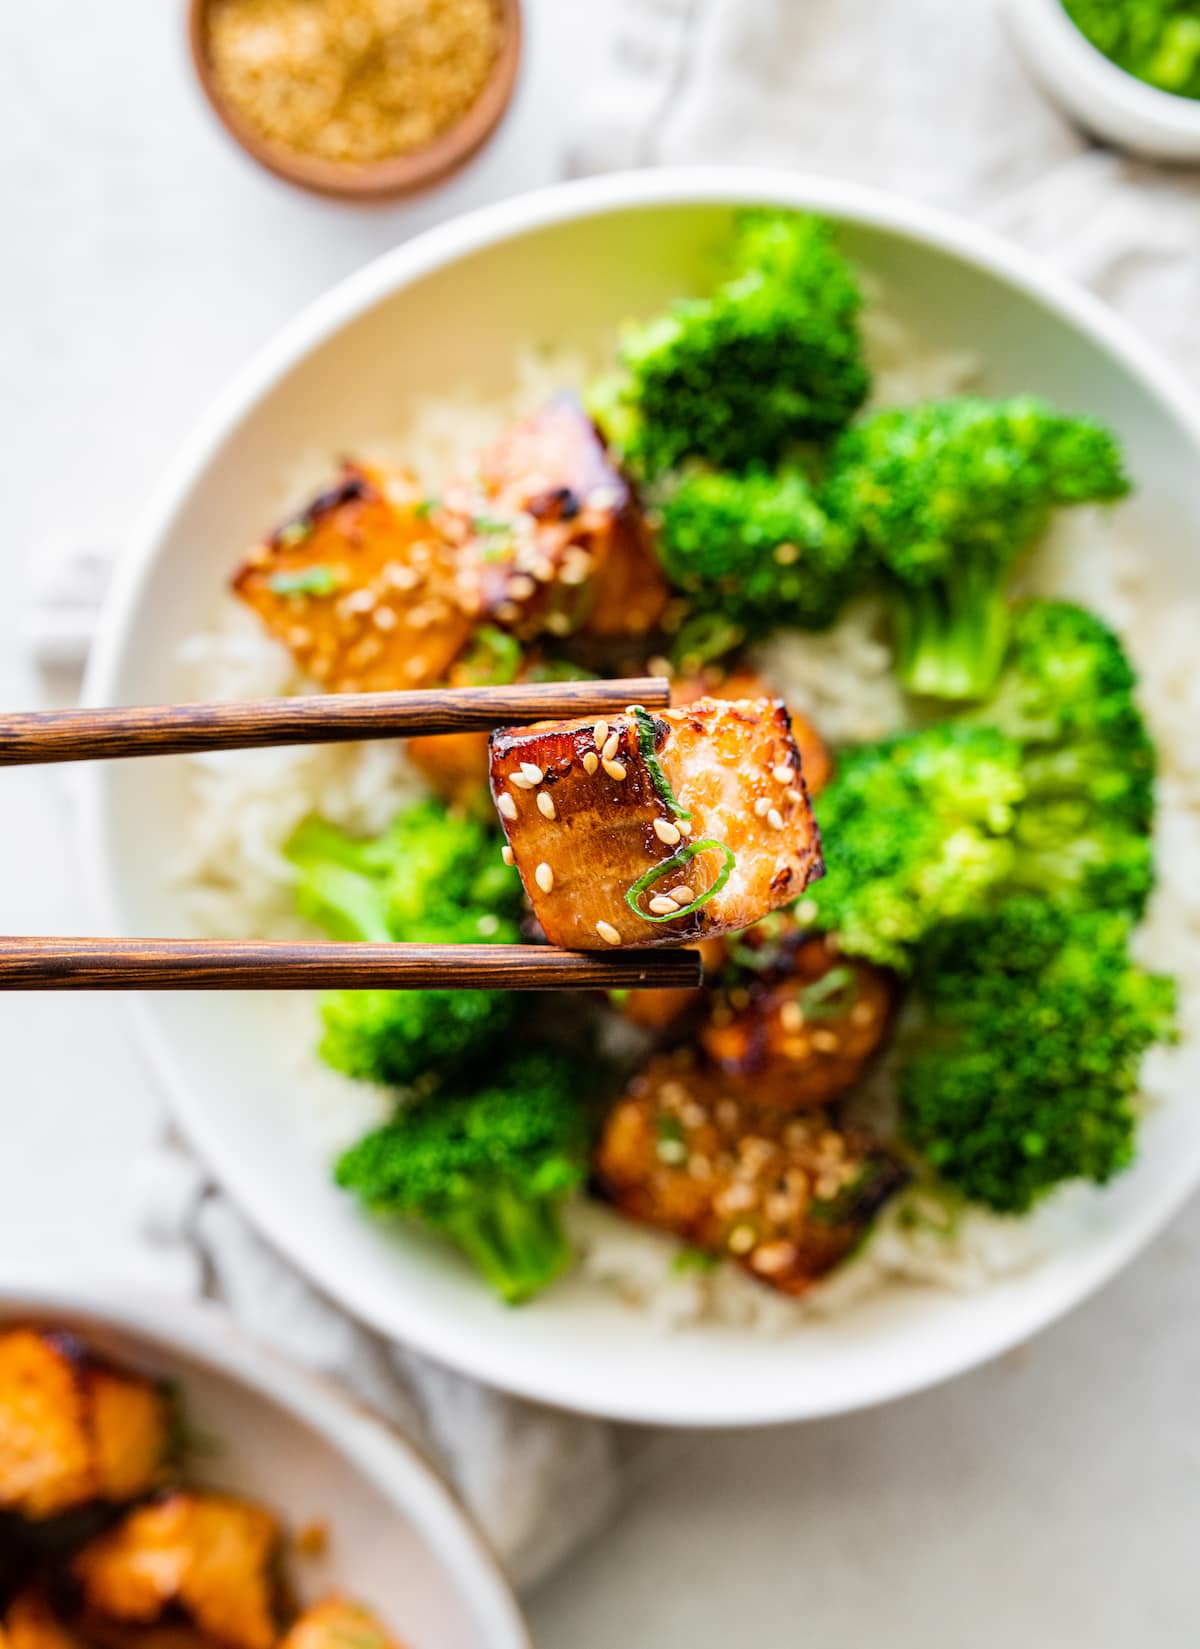 Chopsticks holding one salmon bite over a bowl of salmon bites, broccoli, and rice.